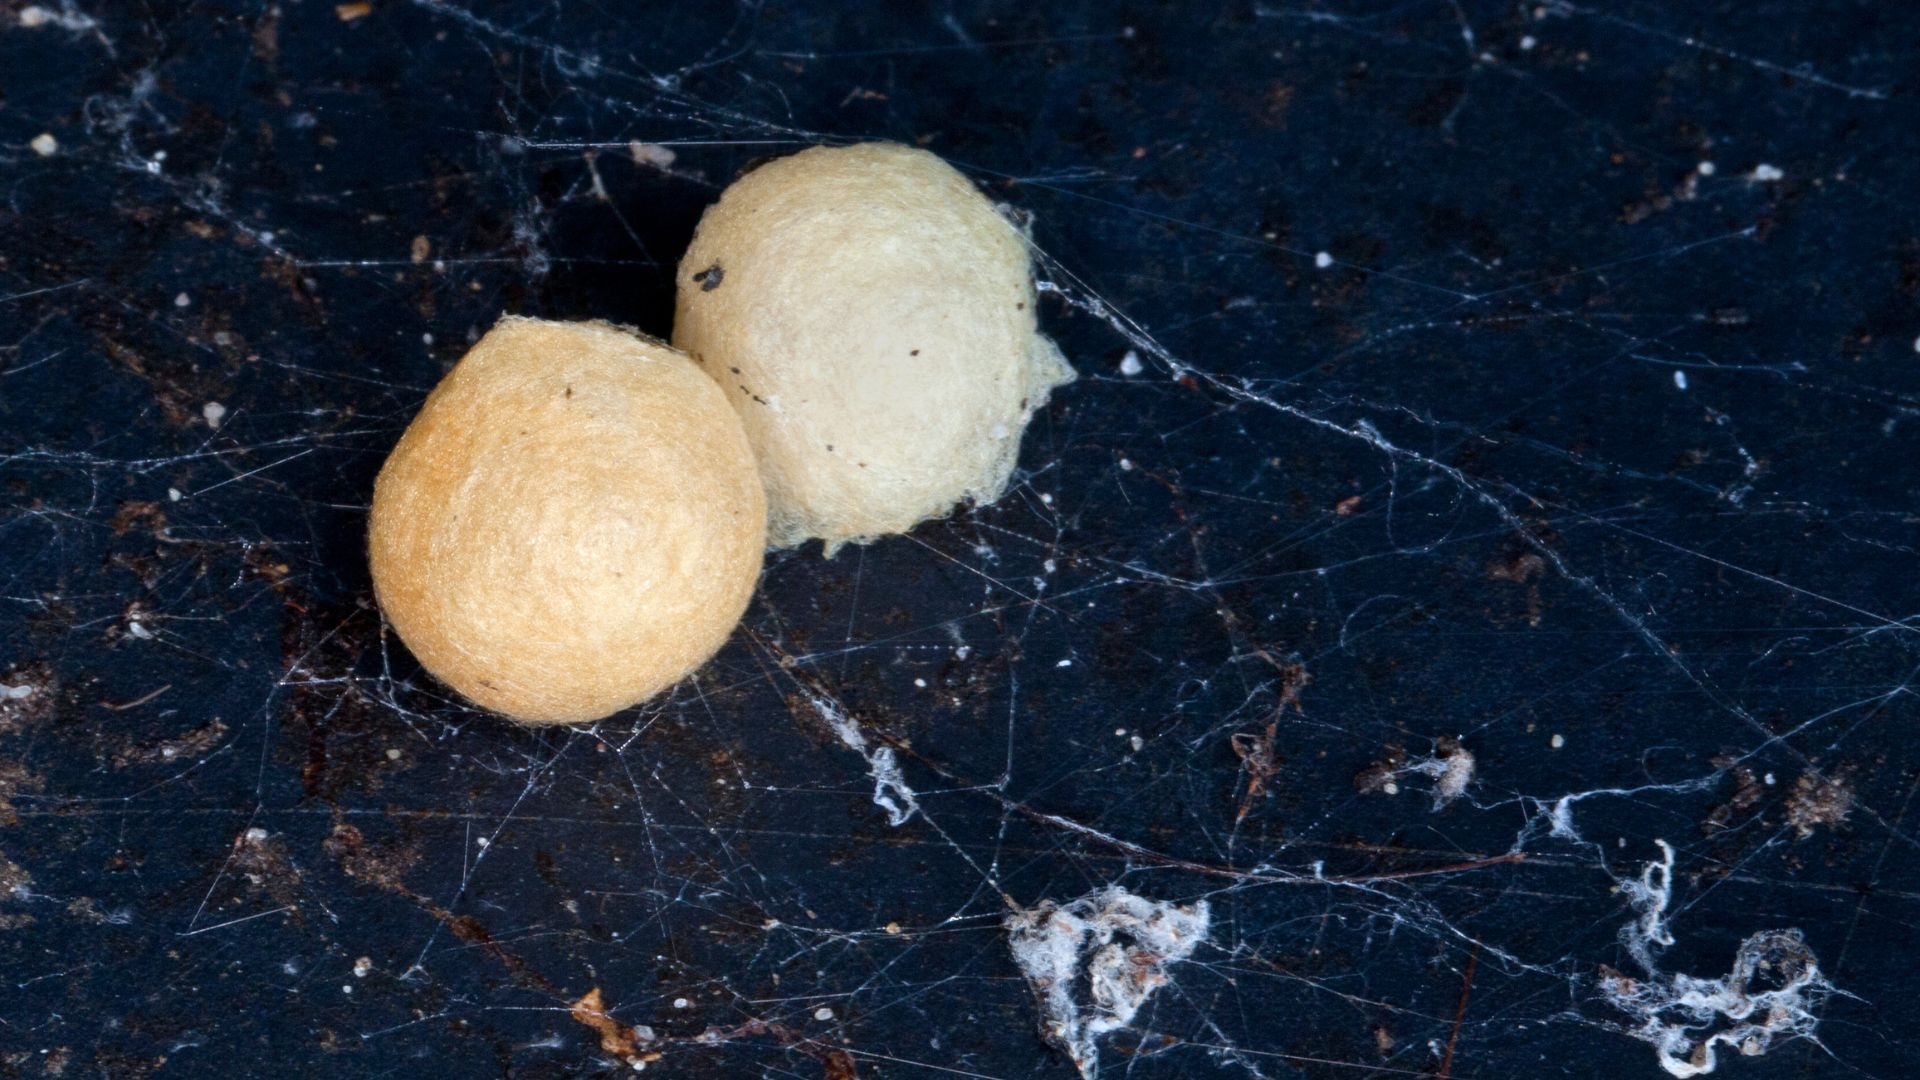 An image of two spider egg sacs.